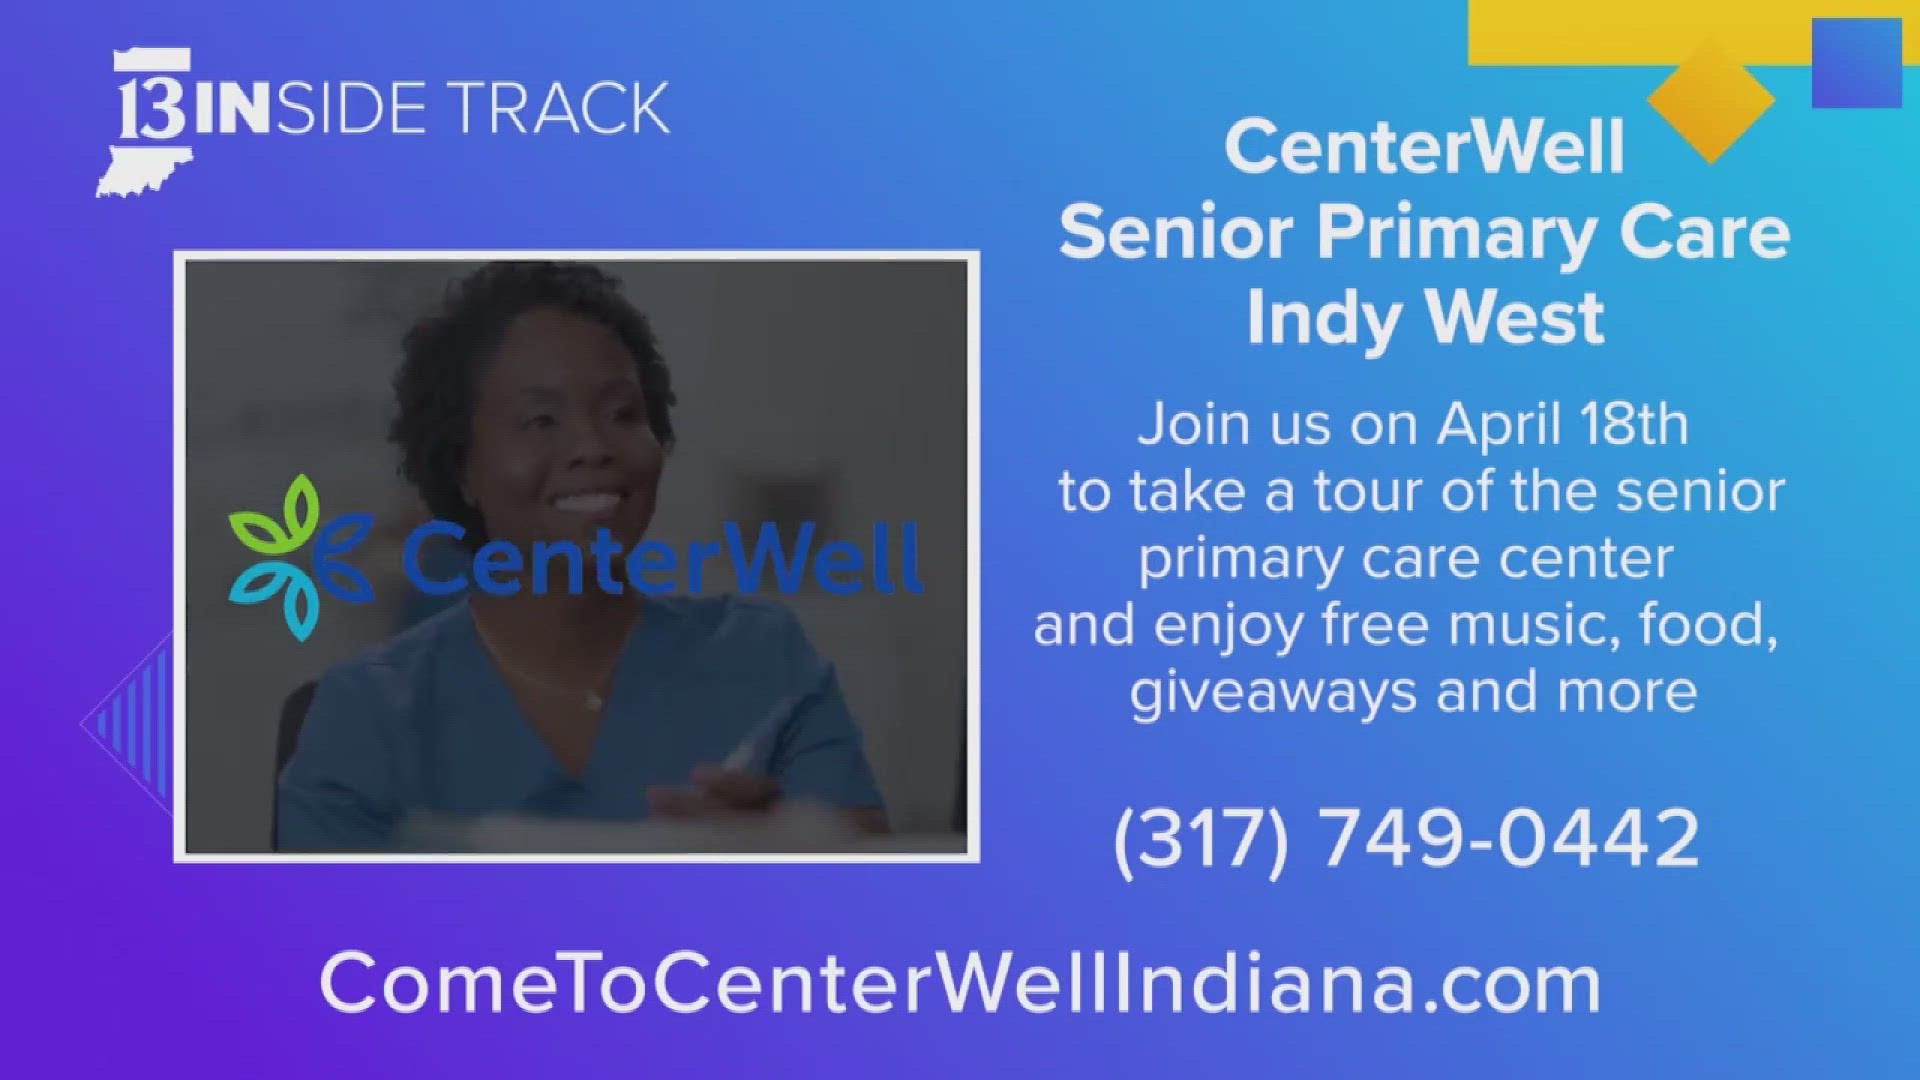 CenterWell Senior Primary Care is hosting their grand opening on April 18th at their Indy West location.